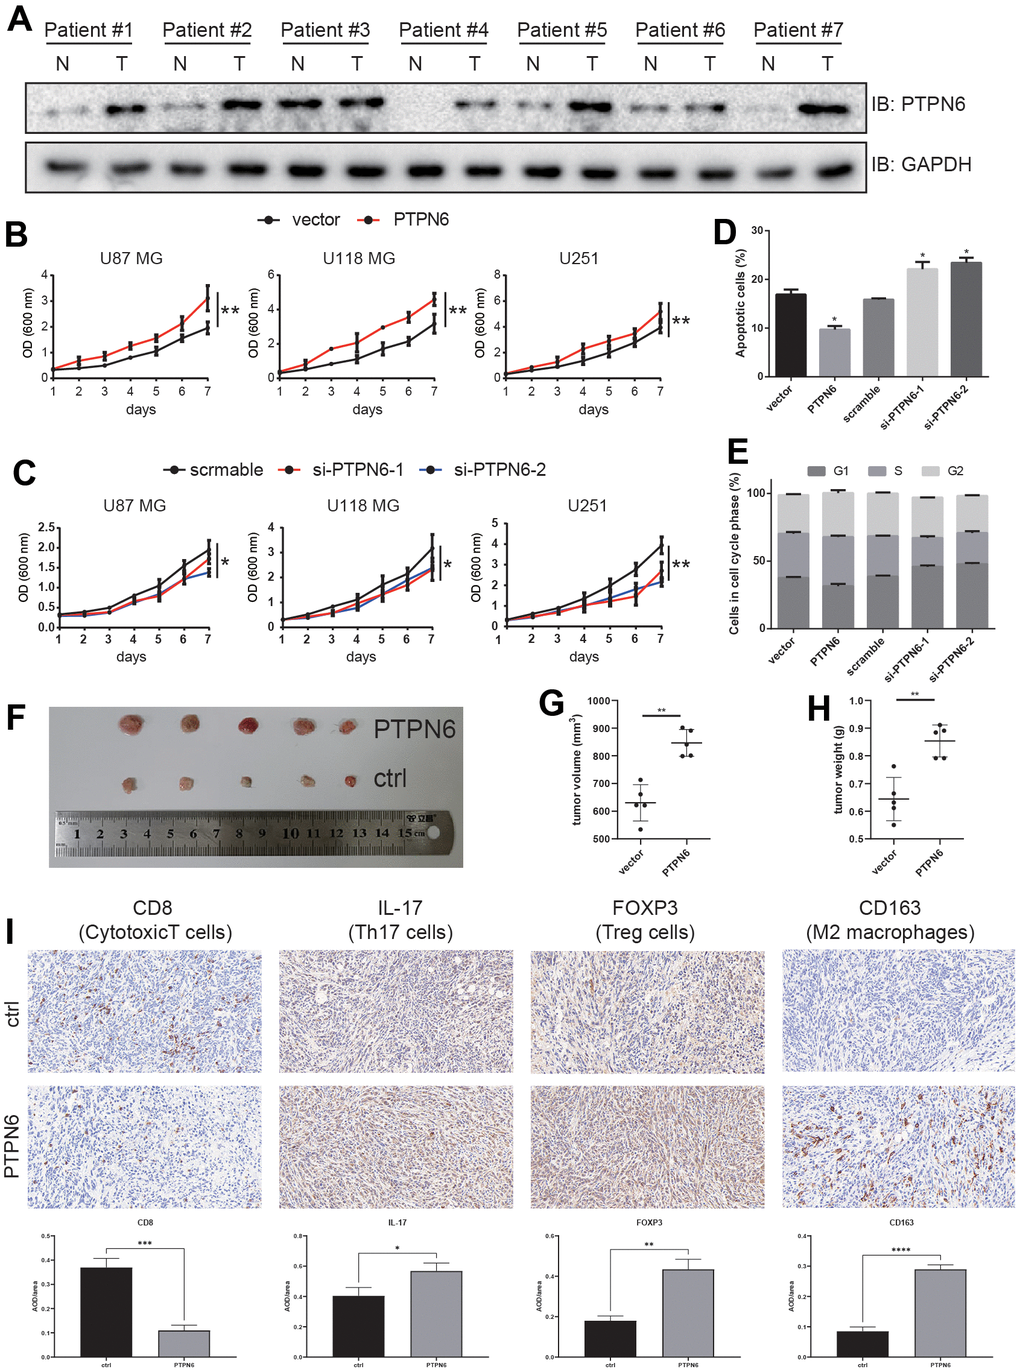 PTPN6 promotes GBM progression. (A) PTPN6 protein expression level is up-regulated in GBM human samples compared with the paired adjacent tissue. (B) PTPN6 overexpression accelerates glioma cell proliferation. (C) PTPN6 knockdown inhibits glioma cell proliferation. (D) PTPN6 overexpression inhibits glioma cell apoptosis; and promotes cell apoptosis after PTPN6 knockdown. (E) PTPN6 overexpression promotes cell cycles; and inhibits cell cycles after PTPN6 knockdown. (F) PTPN6 promotes GBM tumorigenesis in vivo. (G, H) Calculation of GBM nidus from (F), **P I) Evaluating the GBM TME in C57 mice (n = 6, biological repetition = 3). *P 